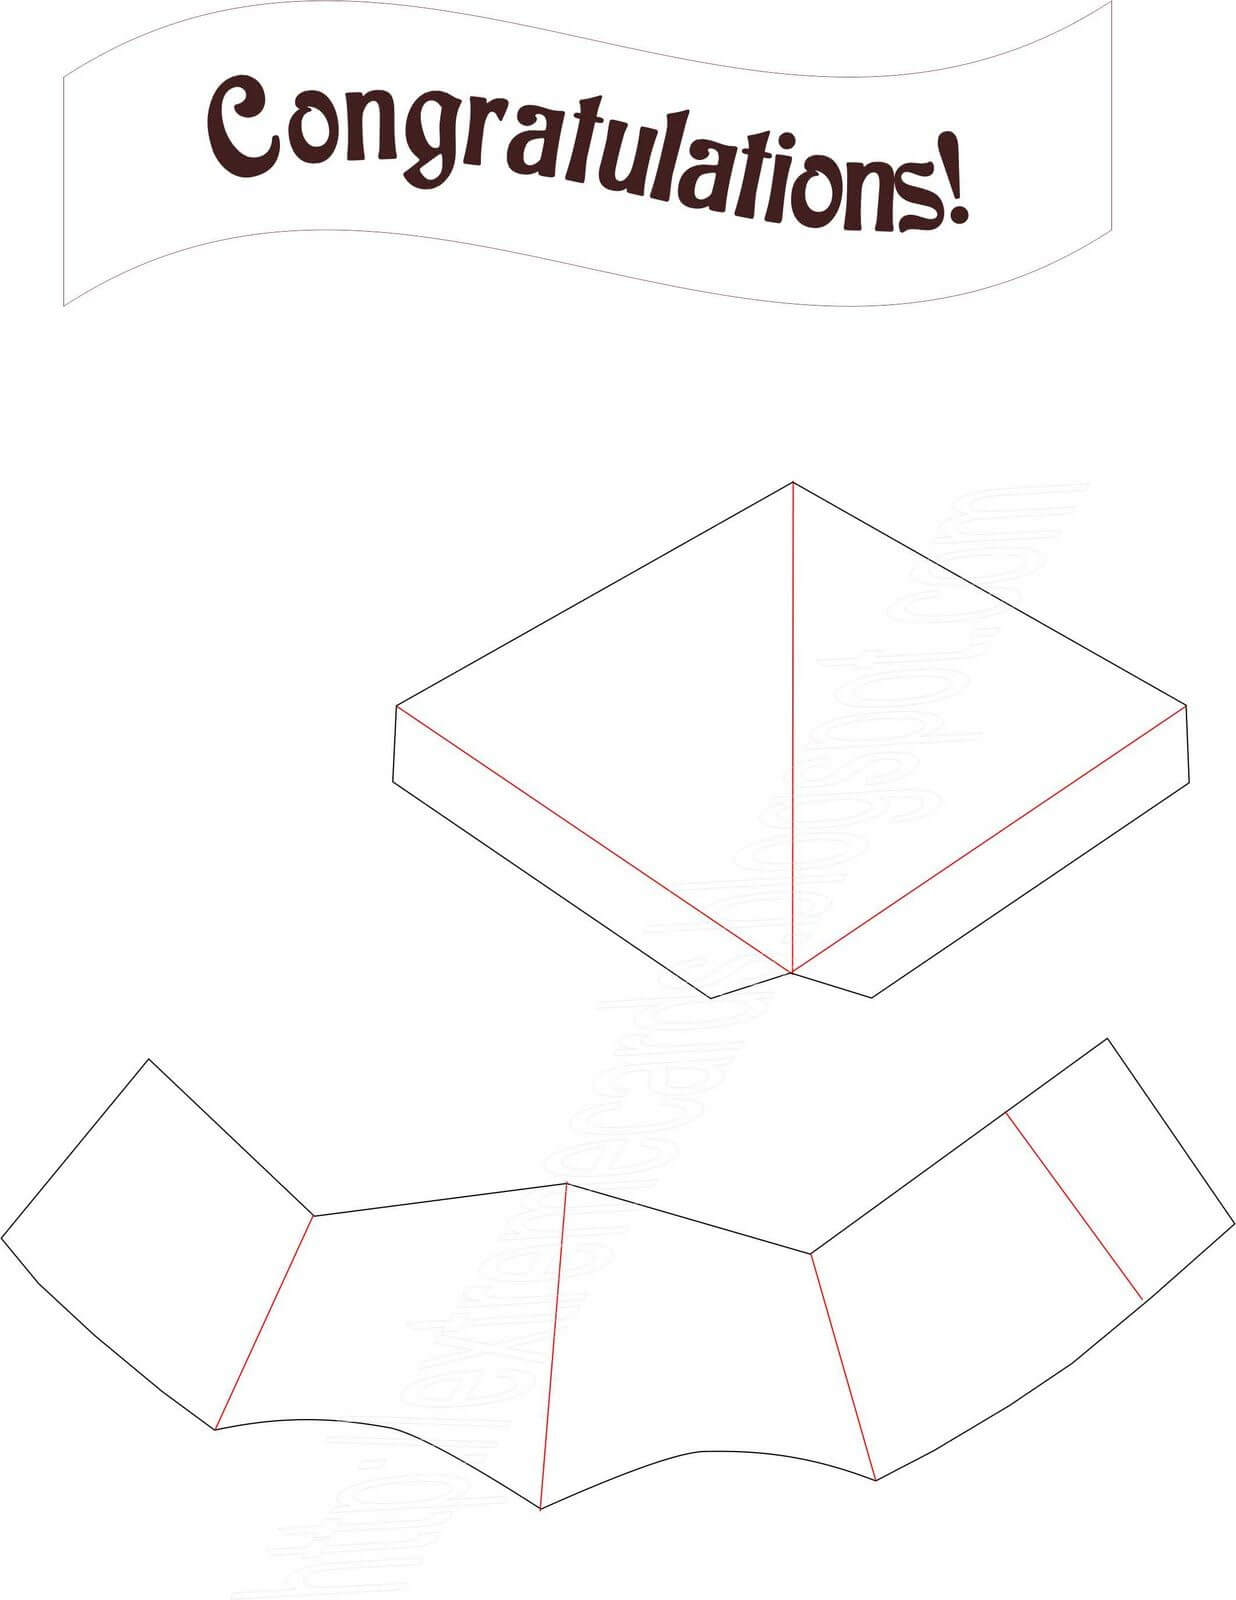 Extreme Cards And Papercrafting: Graduation Cap Pop Up Card With Regard To Graduation Pop Up Card Template